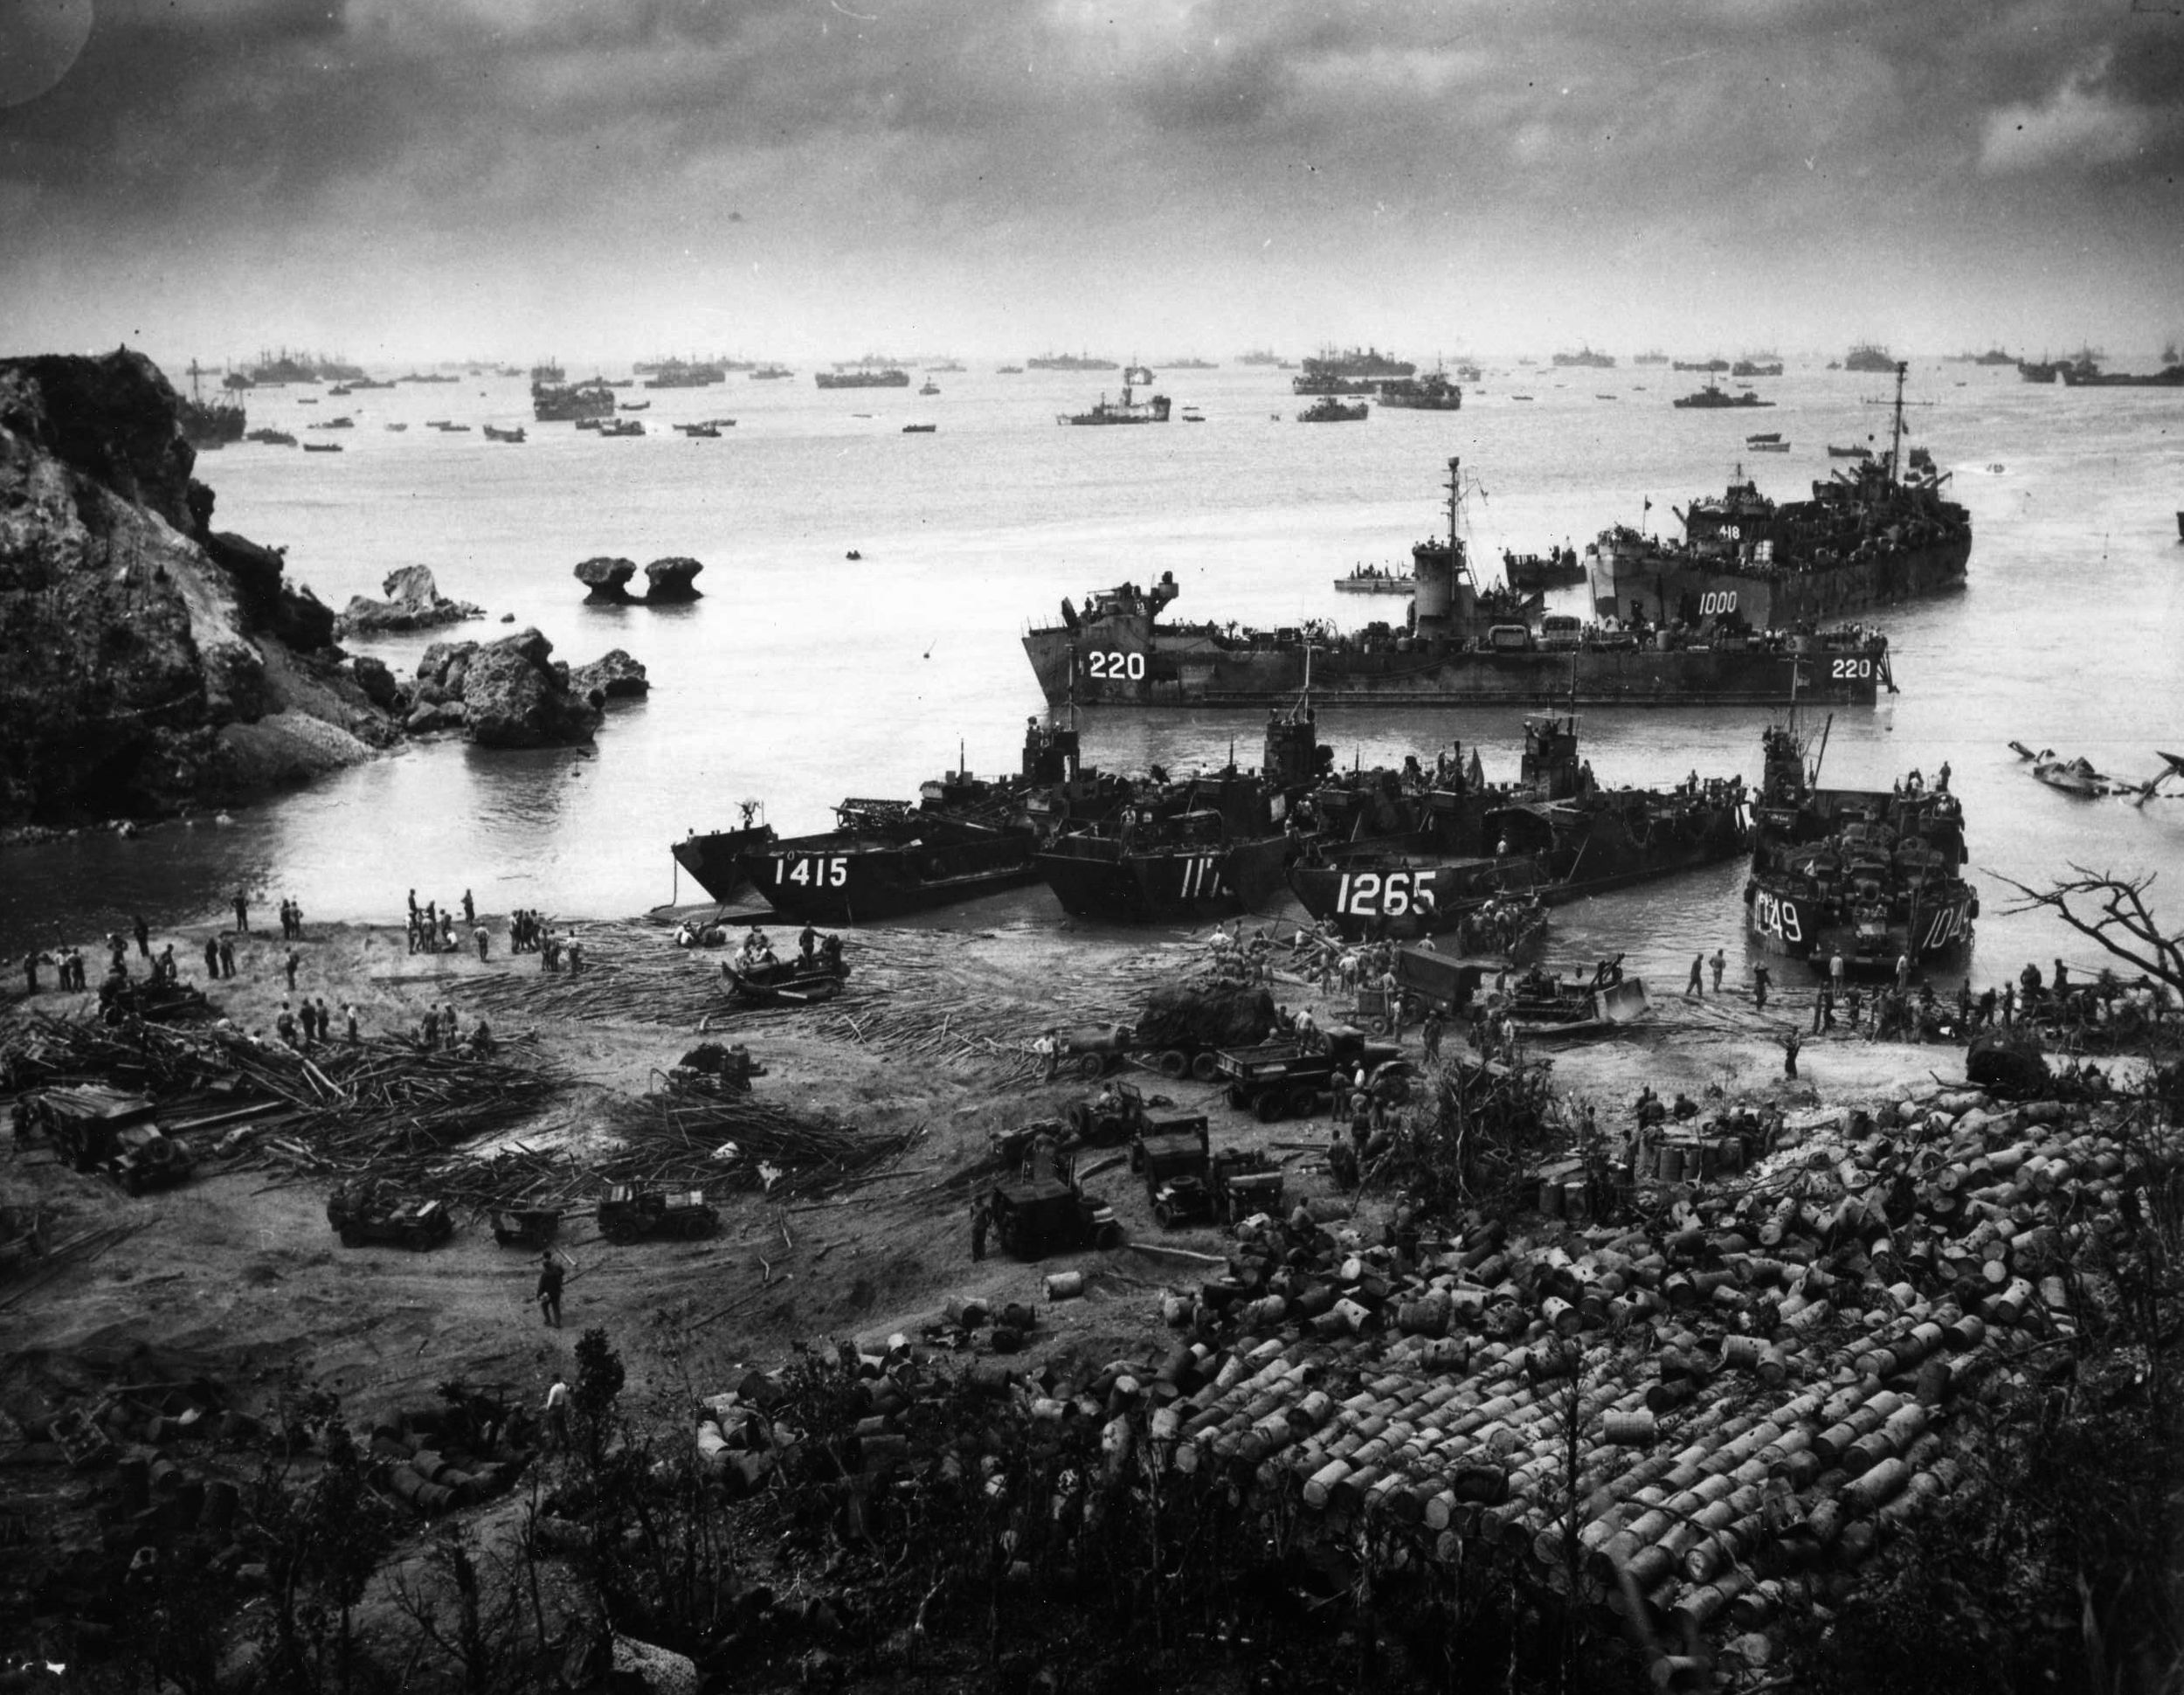 On April 13, 1945, almost two weeks after the initial U.S. landings on Okinawa, U.S. troops may be seen ashore while supply and transport vessels crowd the beach and stretch for miles out to sea. (U.S. Coast Guard)